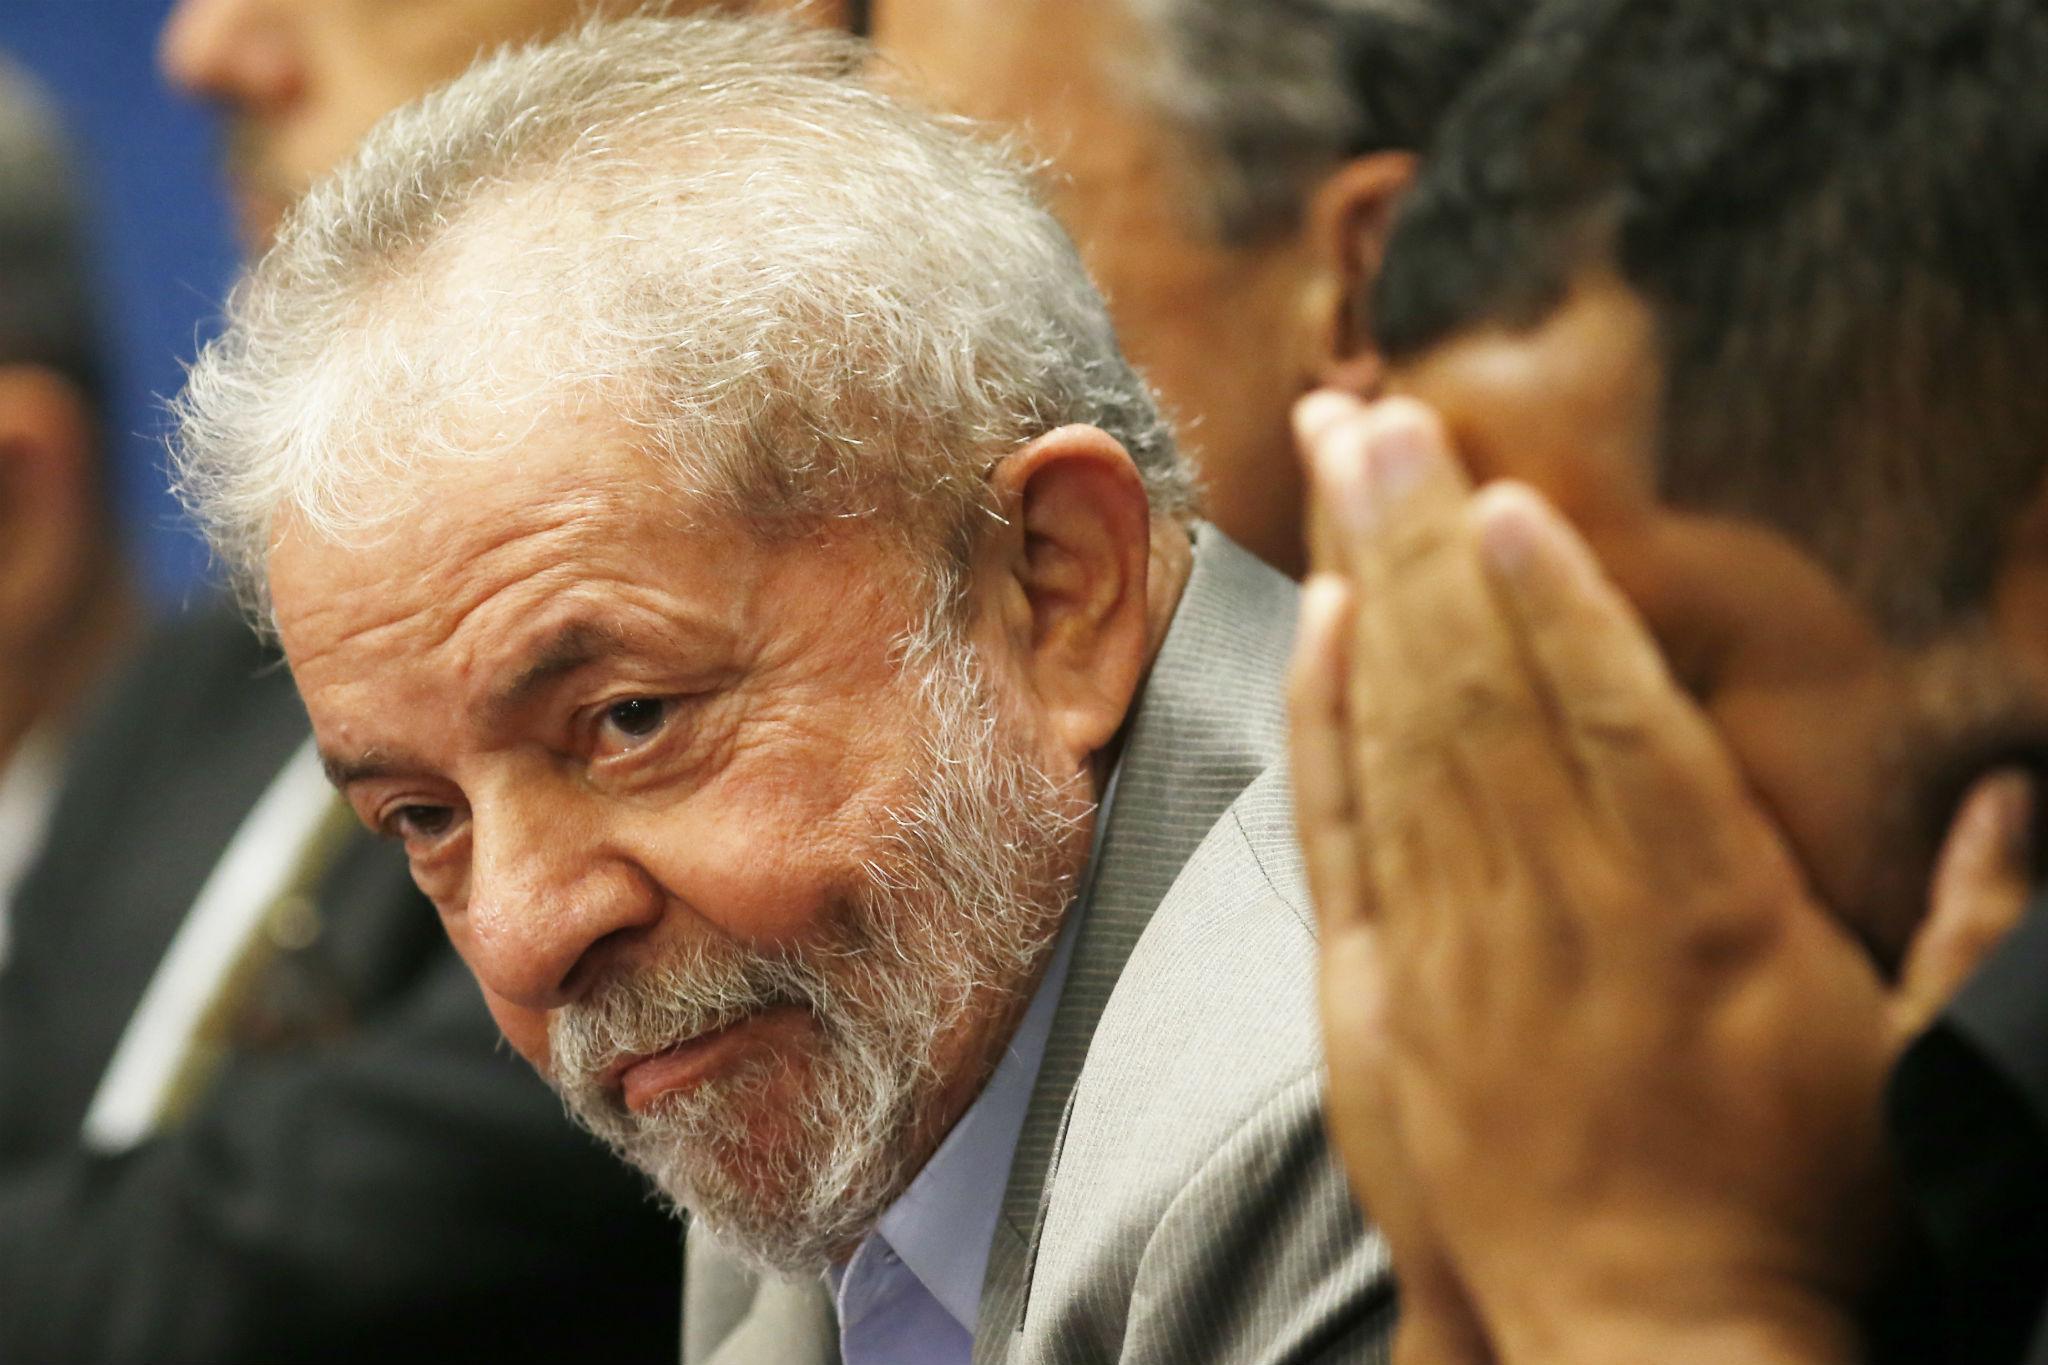 Brazil's former president Lula charged in widening Petrobras